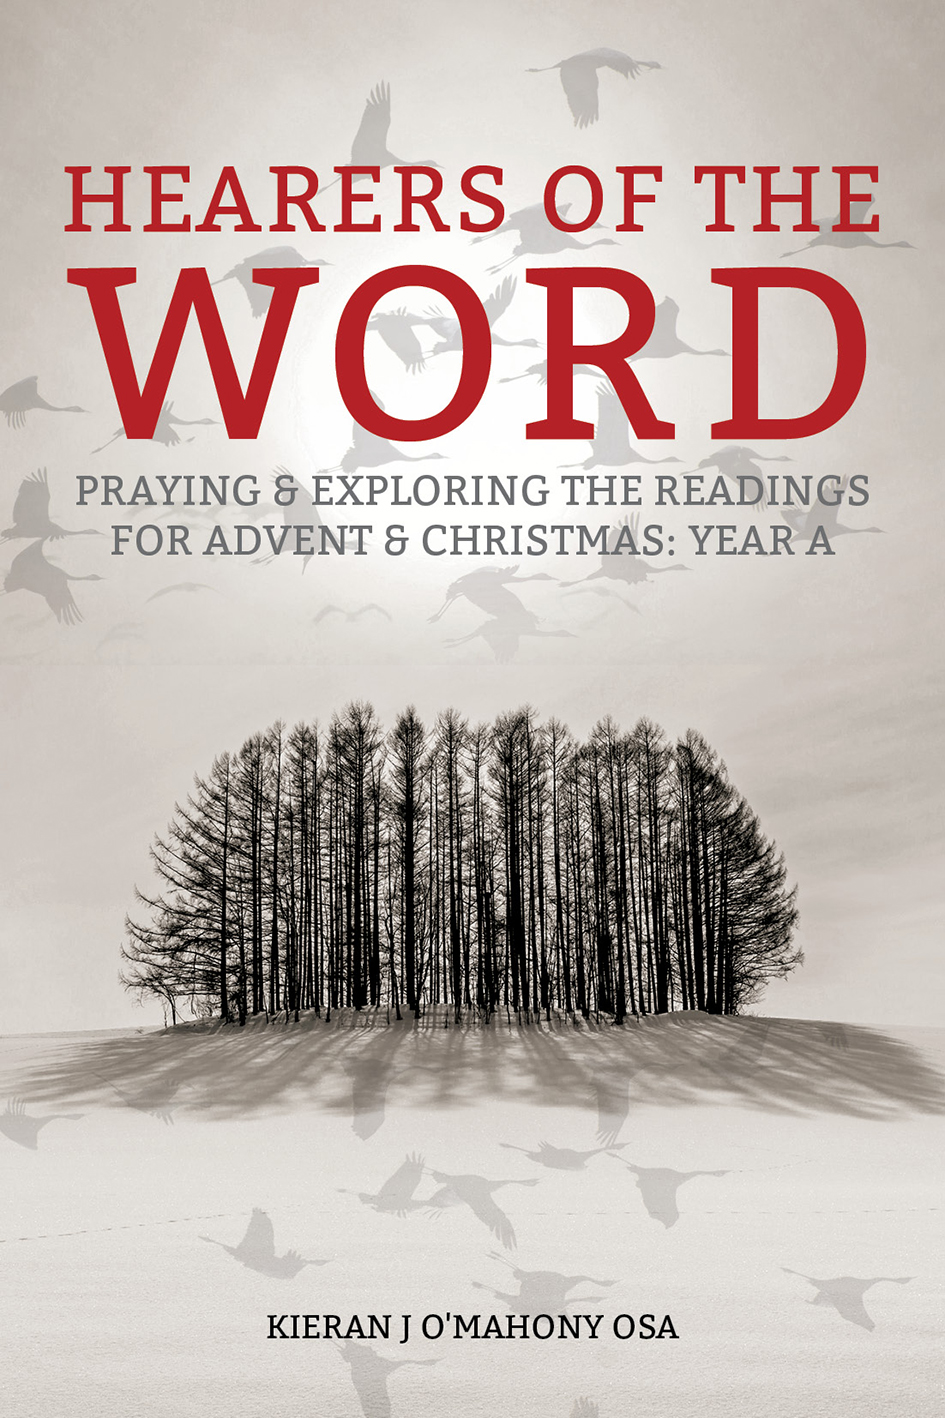 Hearers of The Word : Praying and Exploring the Readings for Advent and Christmas (Year A)